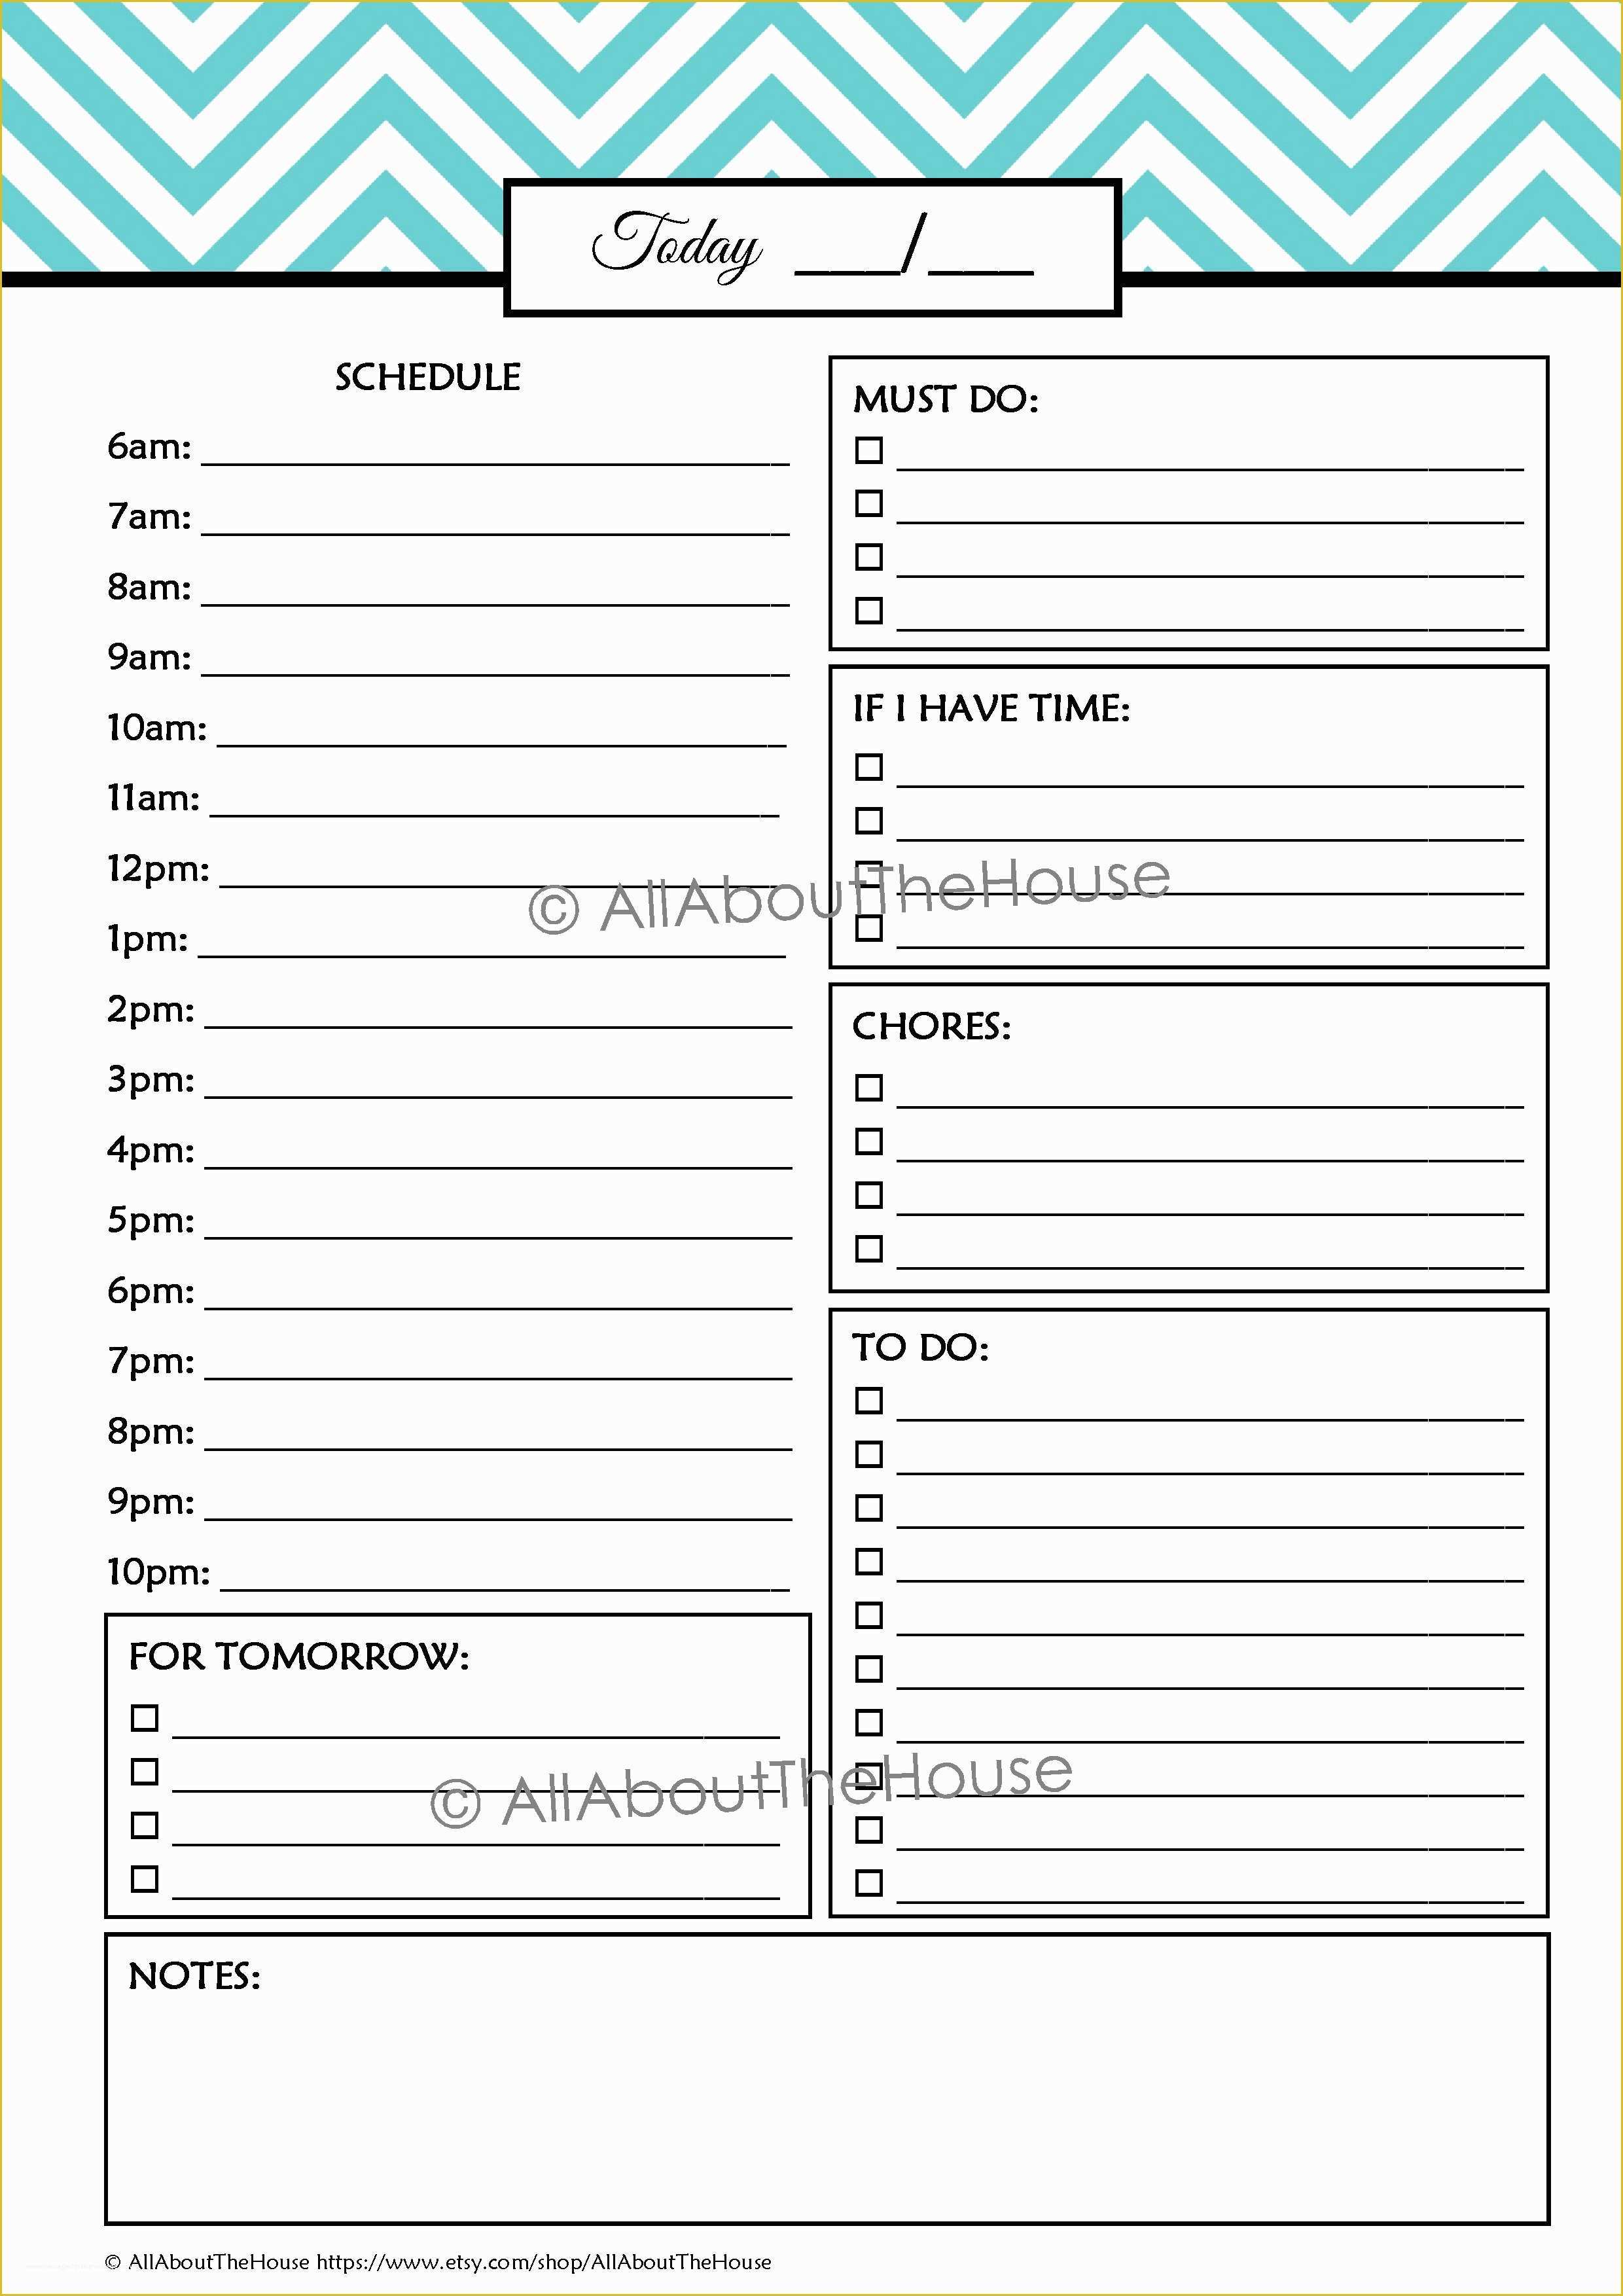 Student Planner Template Free Printable Of Student Planner – Editable